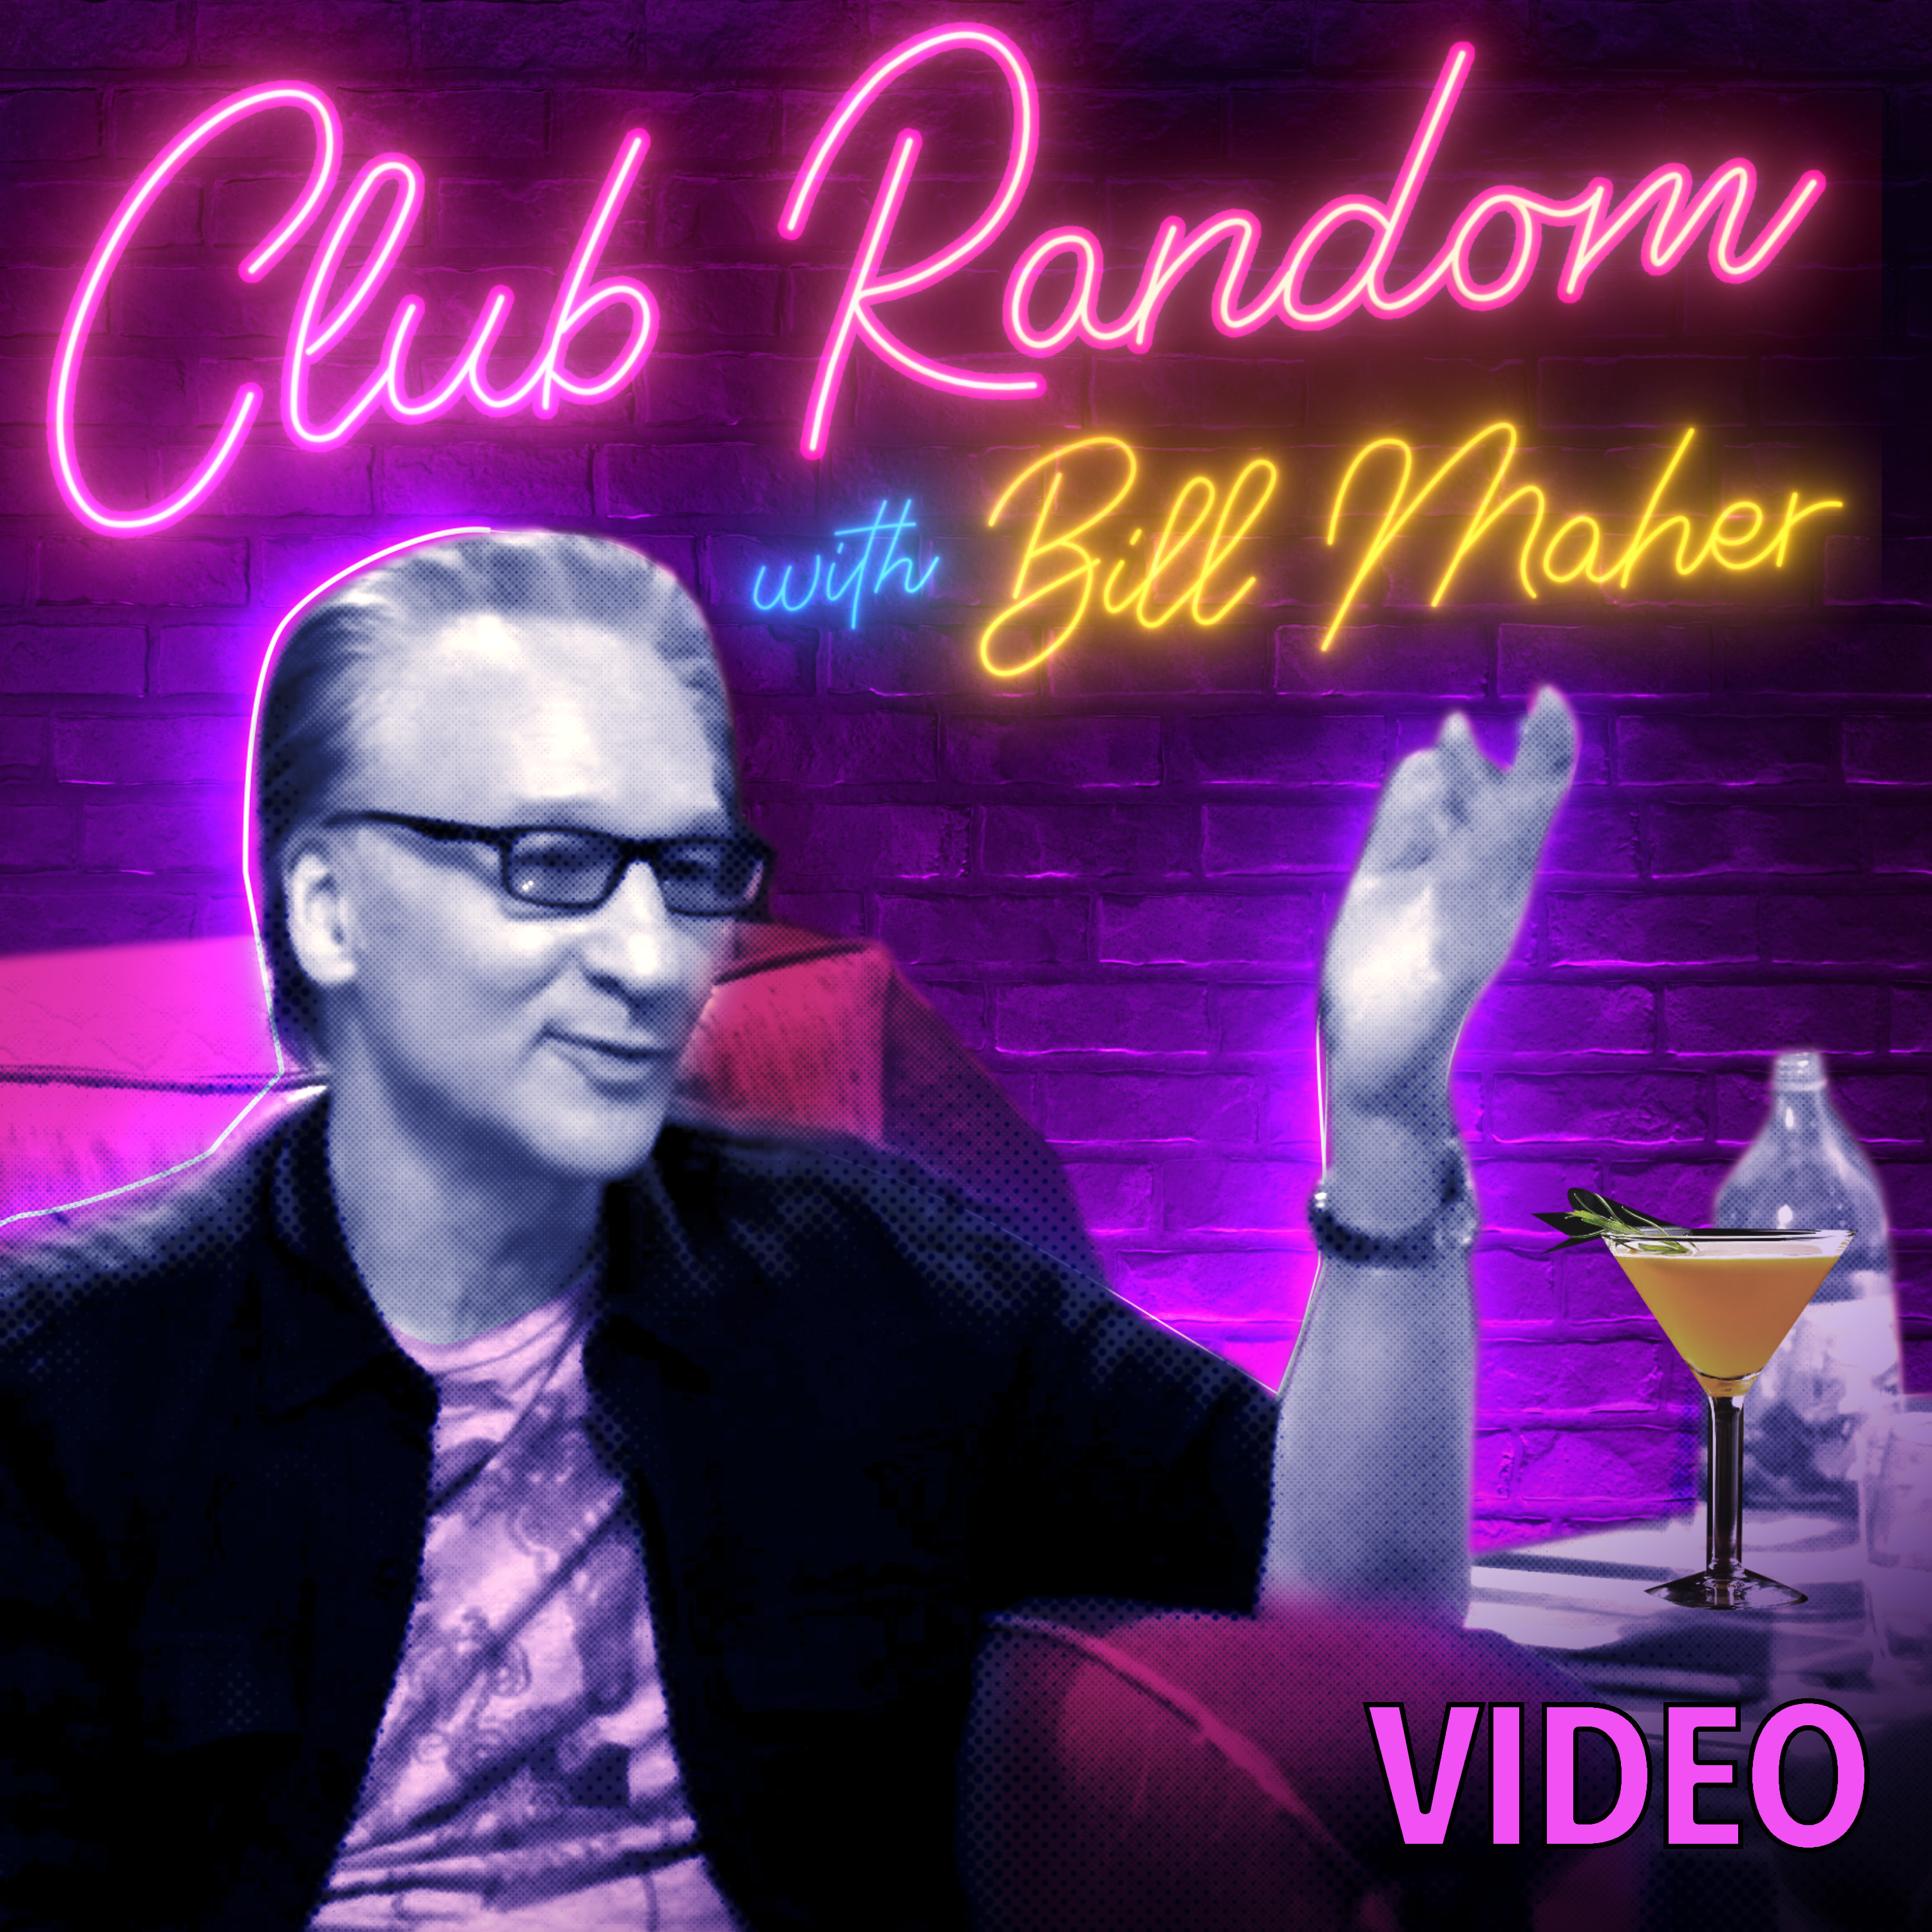 Video: Katie Couric | Club Random with Bill Maher